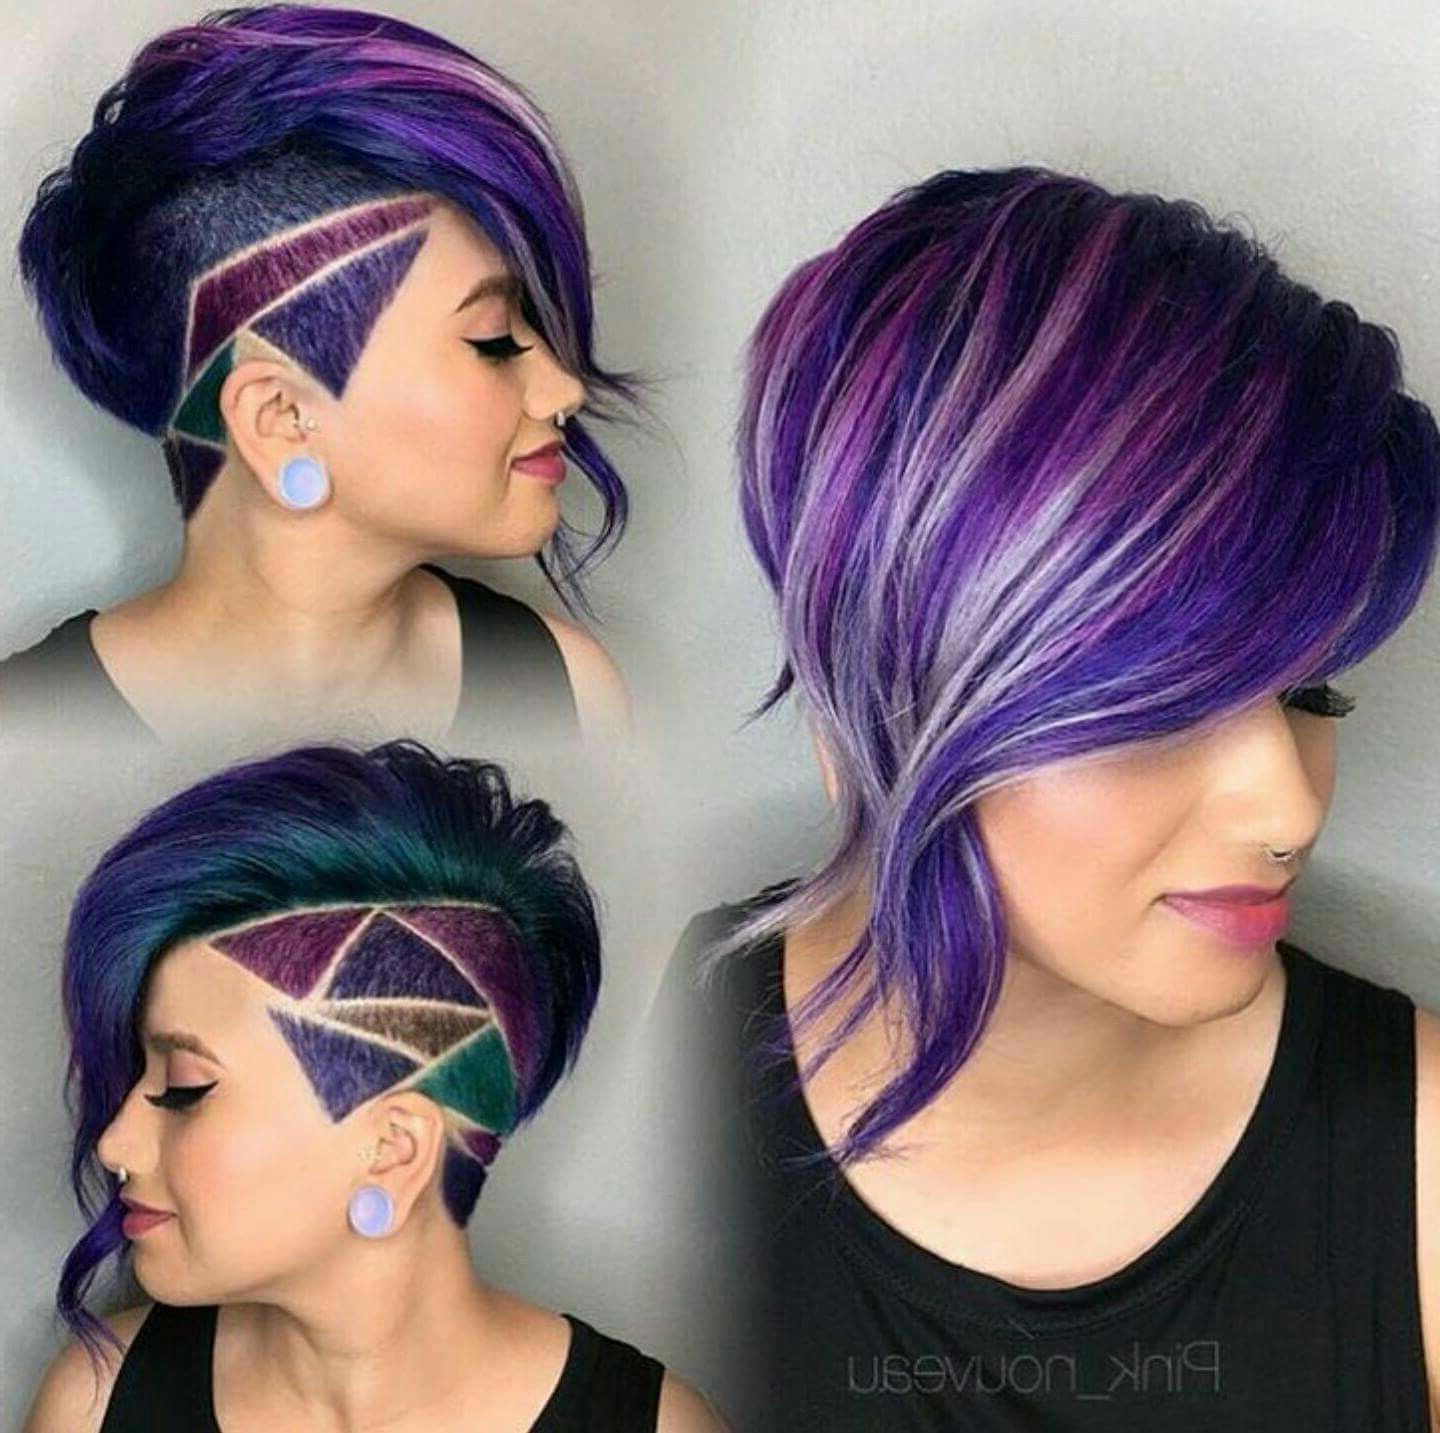 Meine Neue | Hair Inspiration | Pinterest | Short Hair Styles, Hair With Regard To Short Hairstyles With Shaved Side (View 16 of 25)